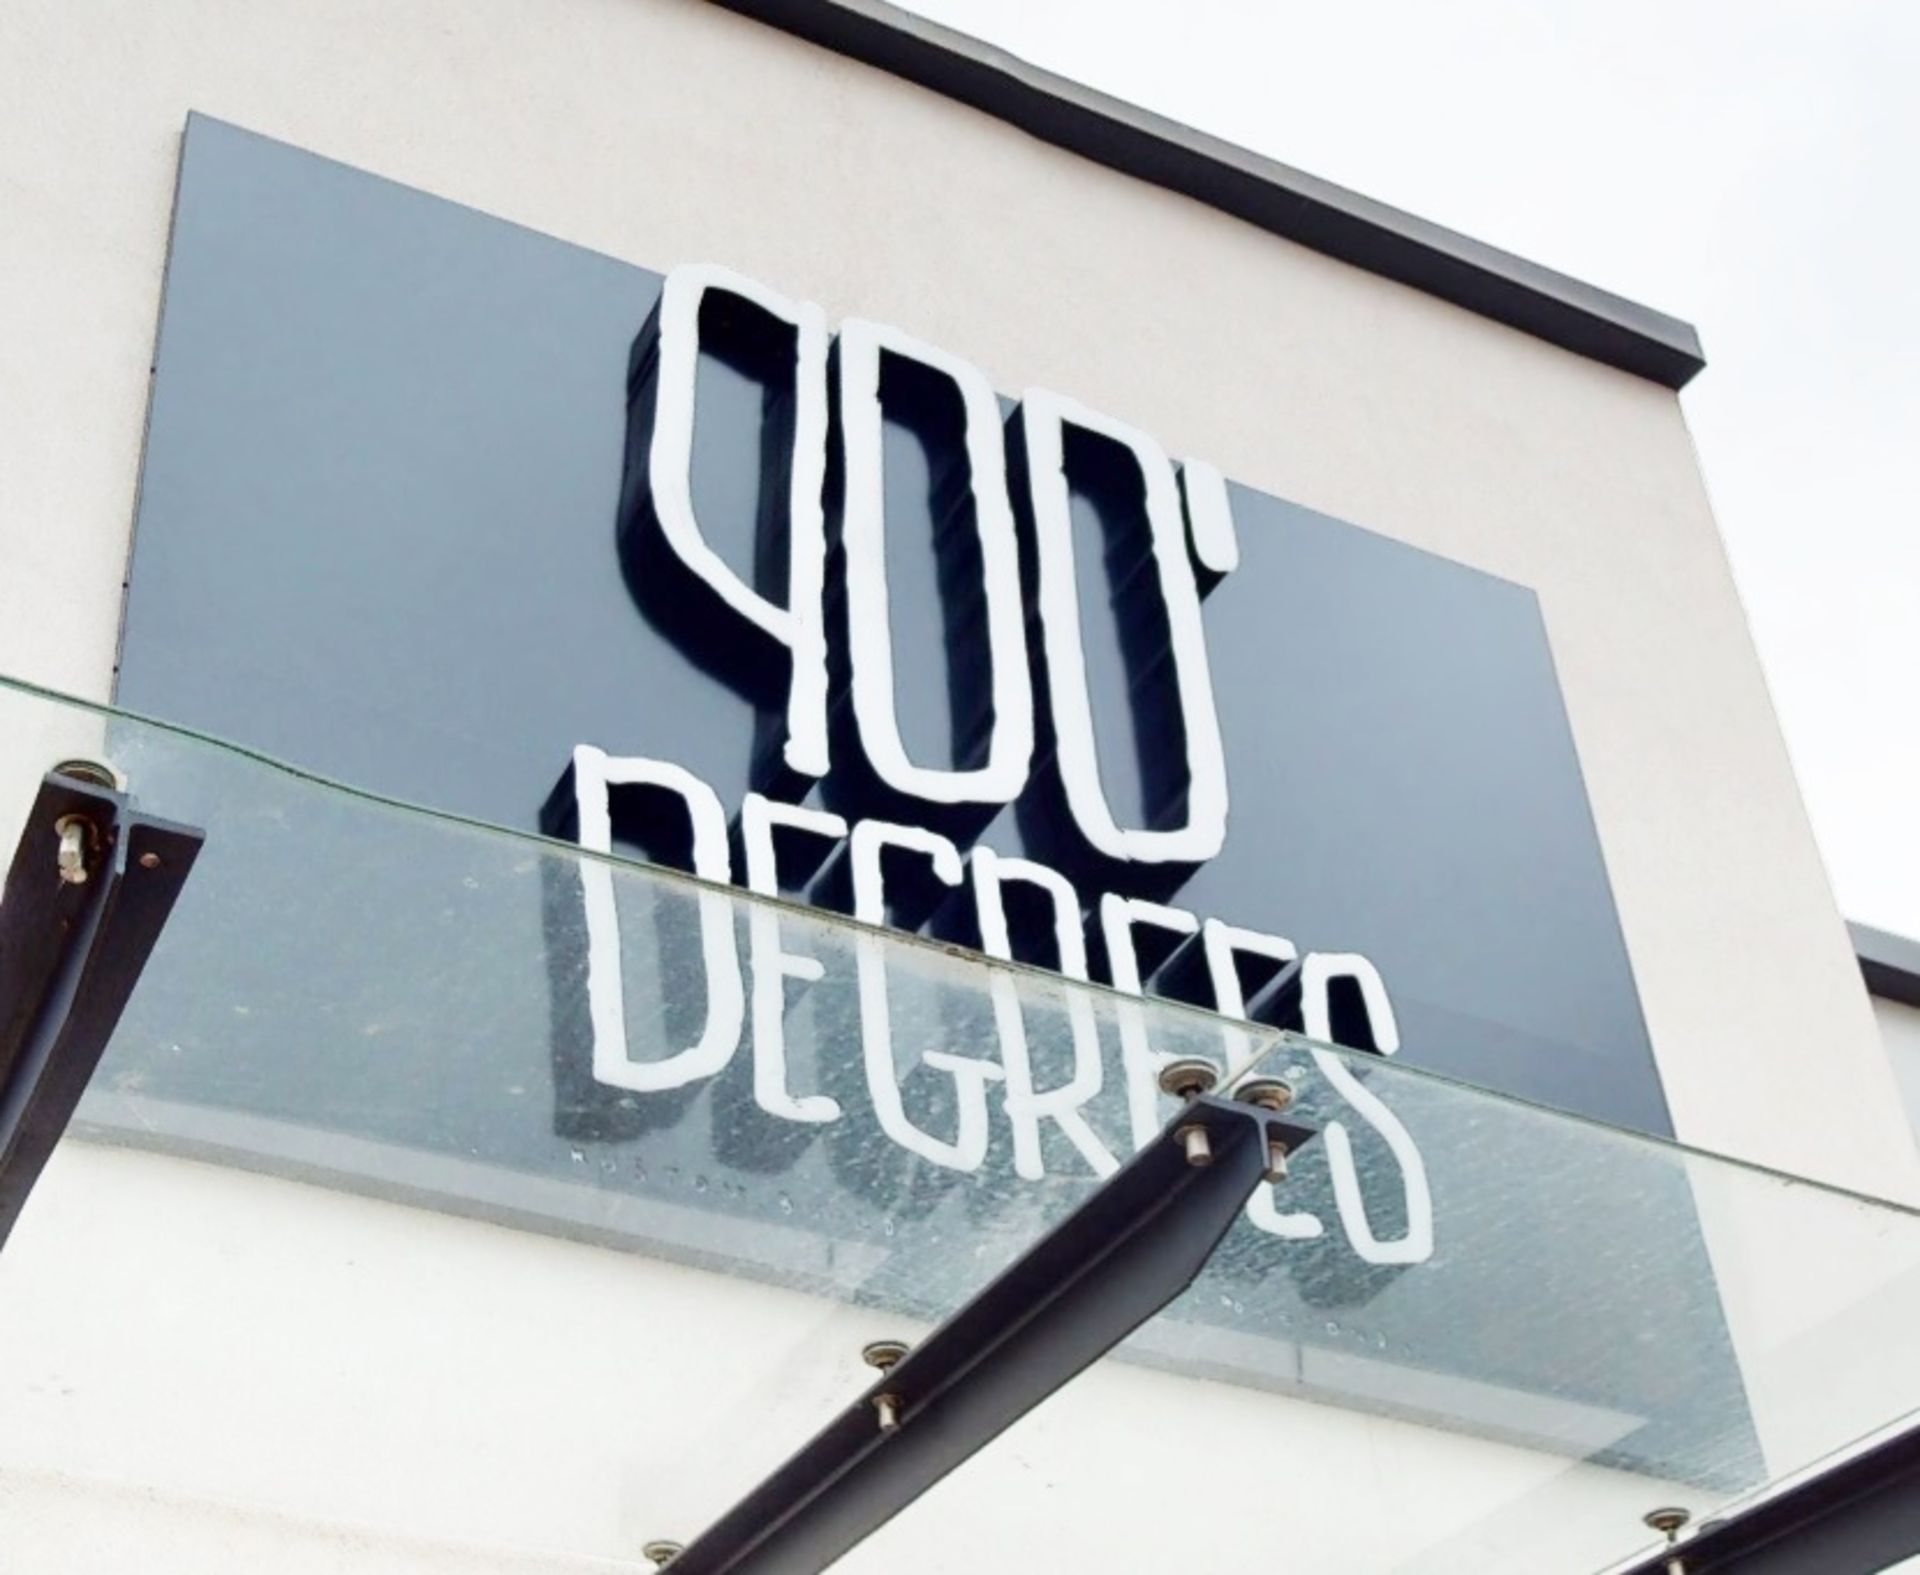 1 x Commercial Signage Featuring 900' DEGREES Branding in Large Illuminated Letters Mounted On Large - Image 3 of 5